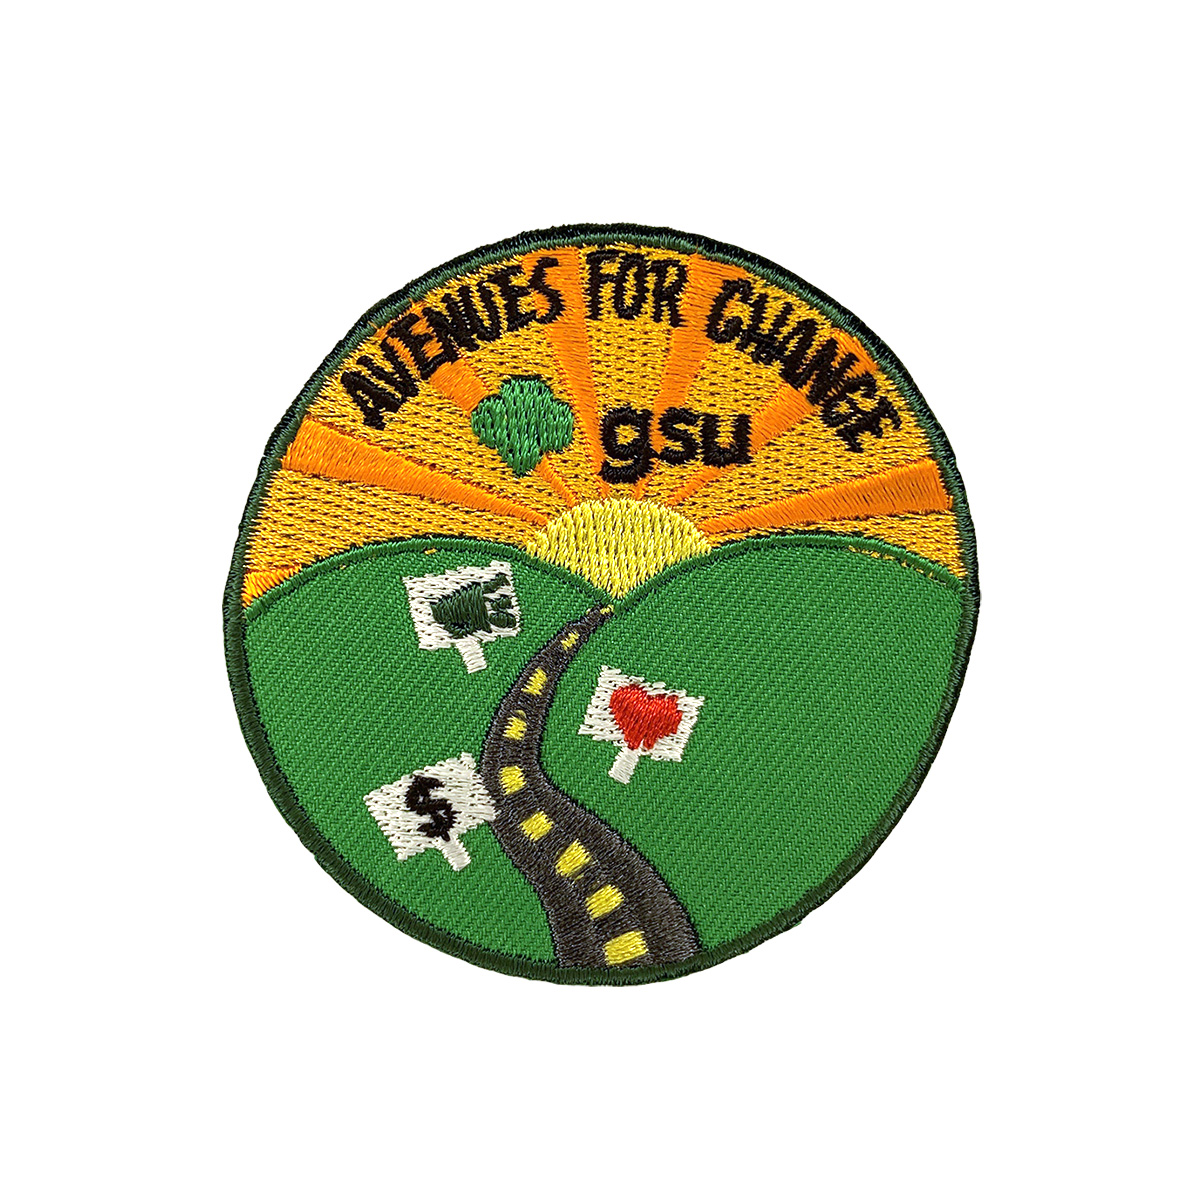 Avenues for Change Patch